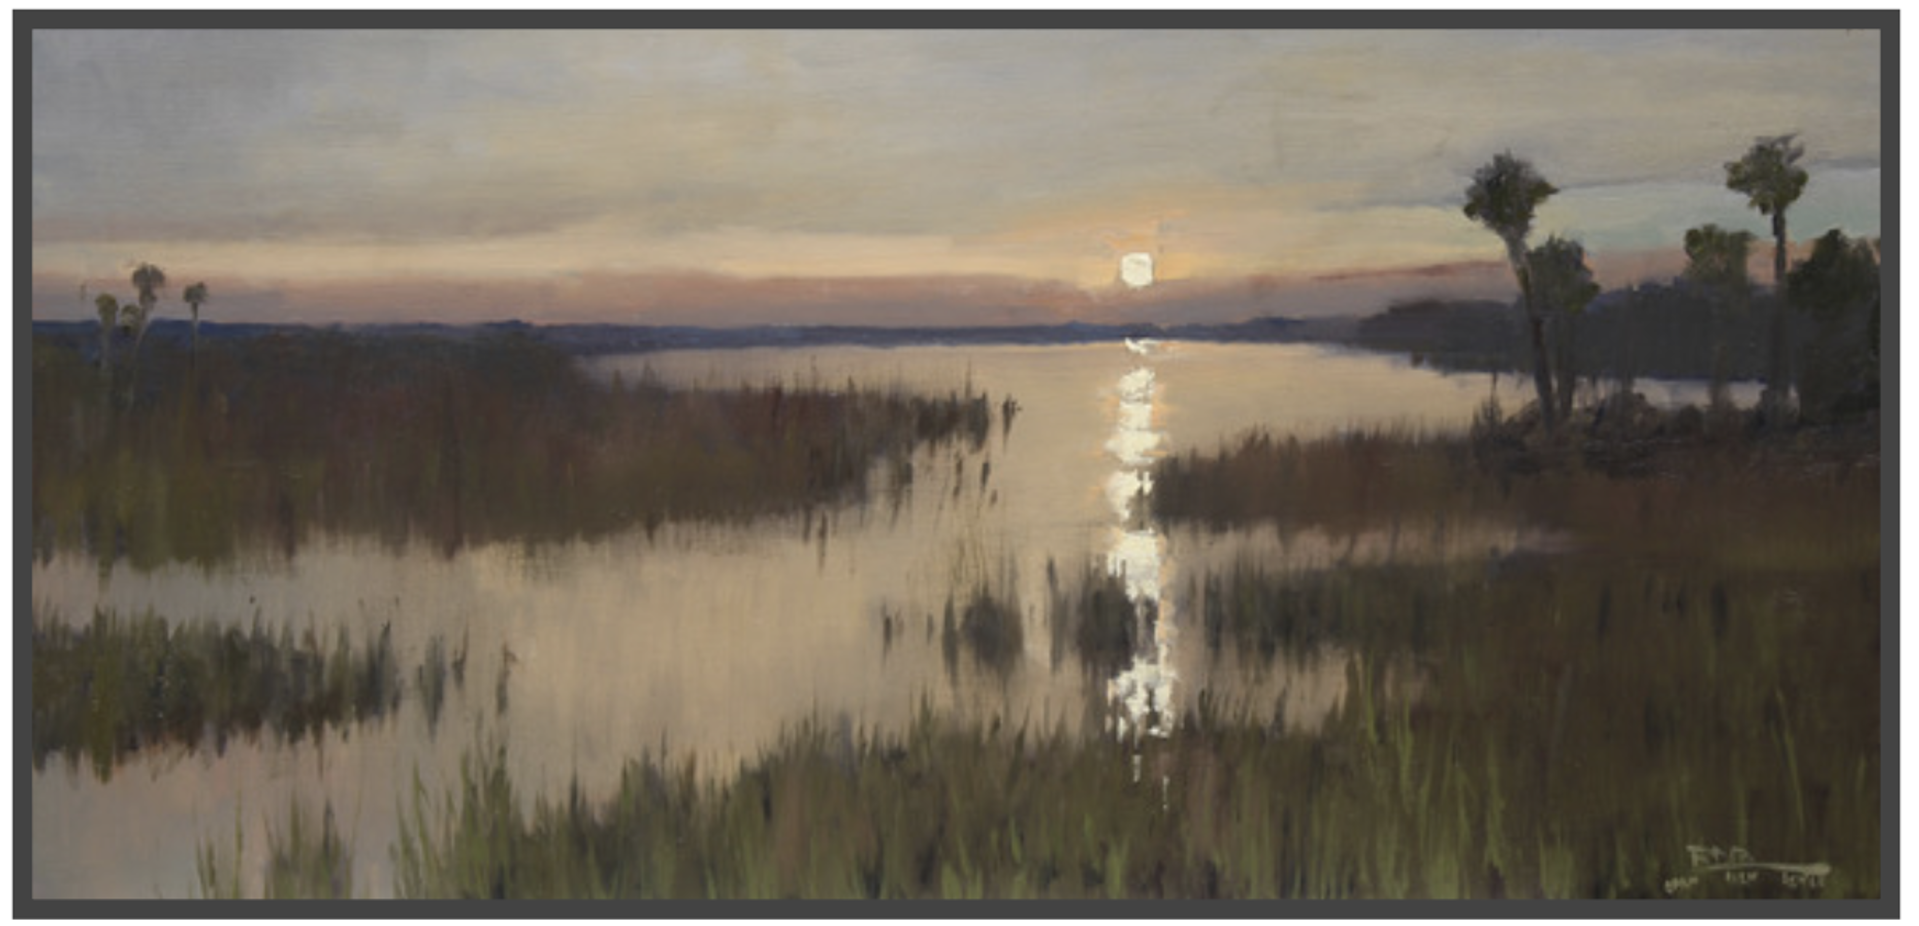 Dusk in the Low Country by Roger Dale Brown